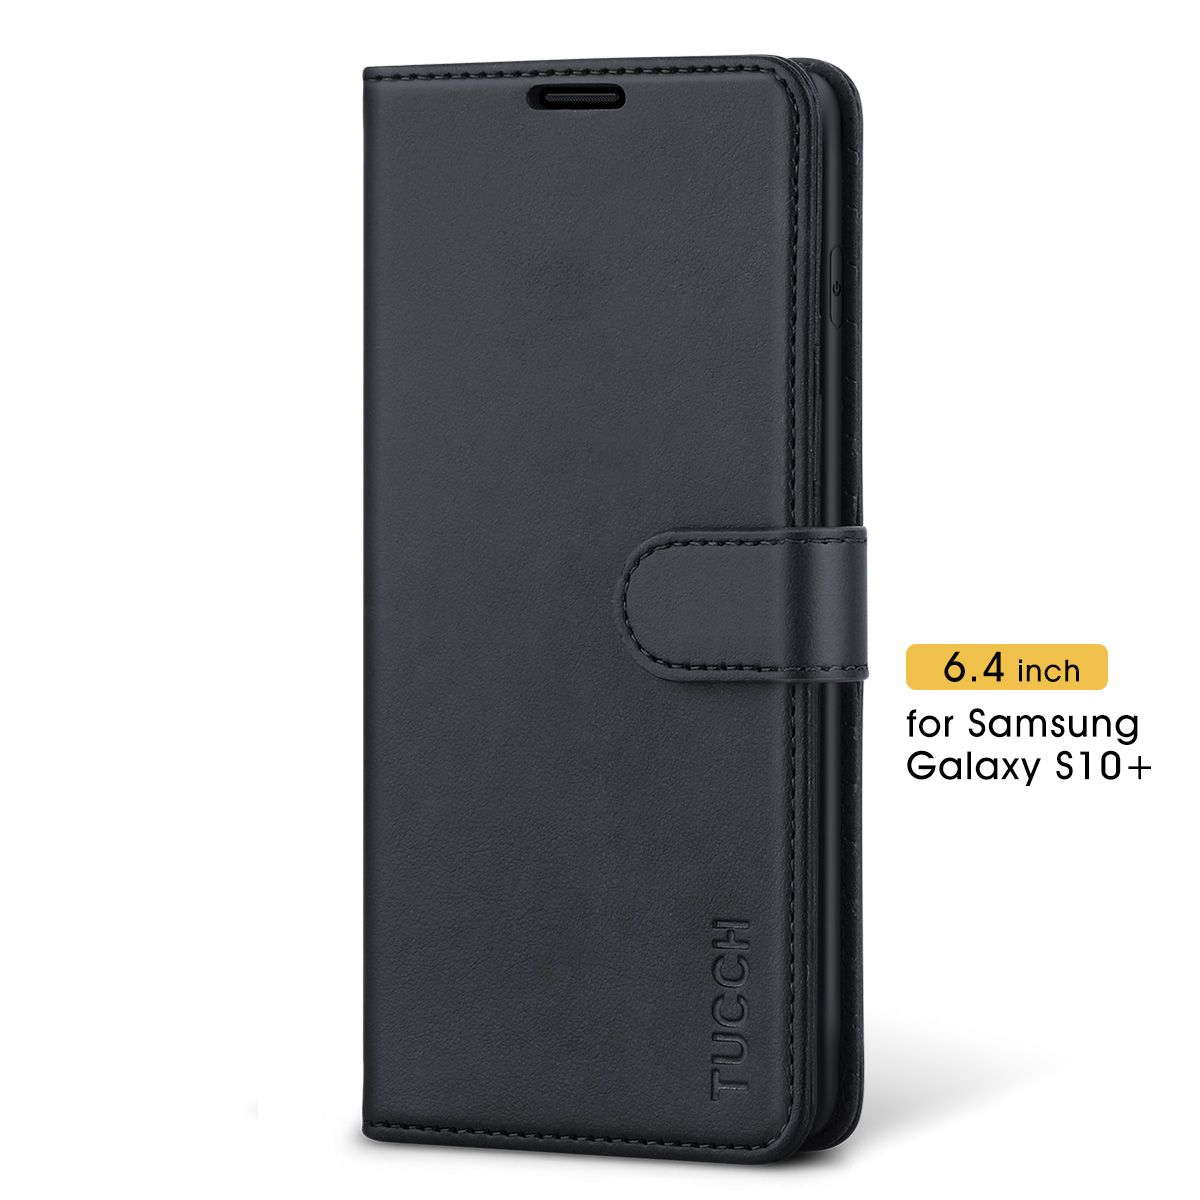 Leather Cover Compatible with Samsung Galaxy S10 Black Wallet Case for Samsung Galaxy S10 